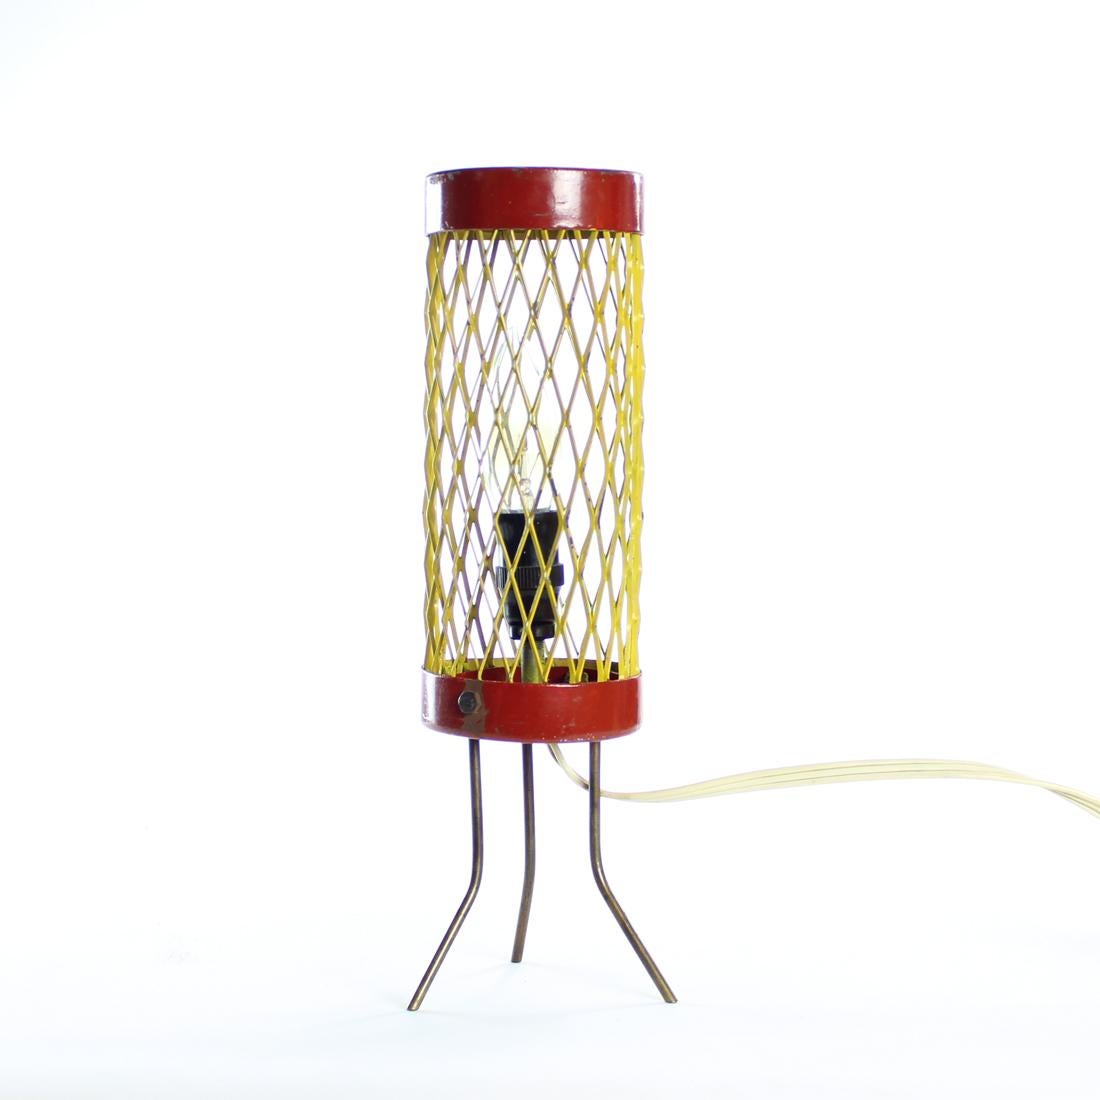 Rare table lamp produced in Czechoslovakia in 1950s. The lamp is stands on three elegant metal legs. The shield consists of a strong steel mash in yellow color. The top and bottom rings holding the mash are also made of steel, in bordeaux color. The